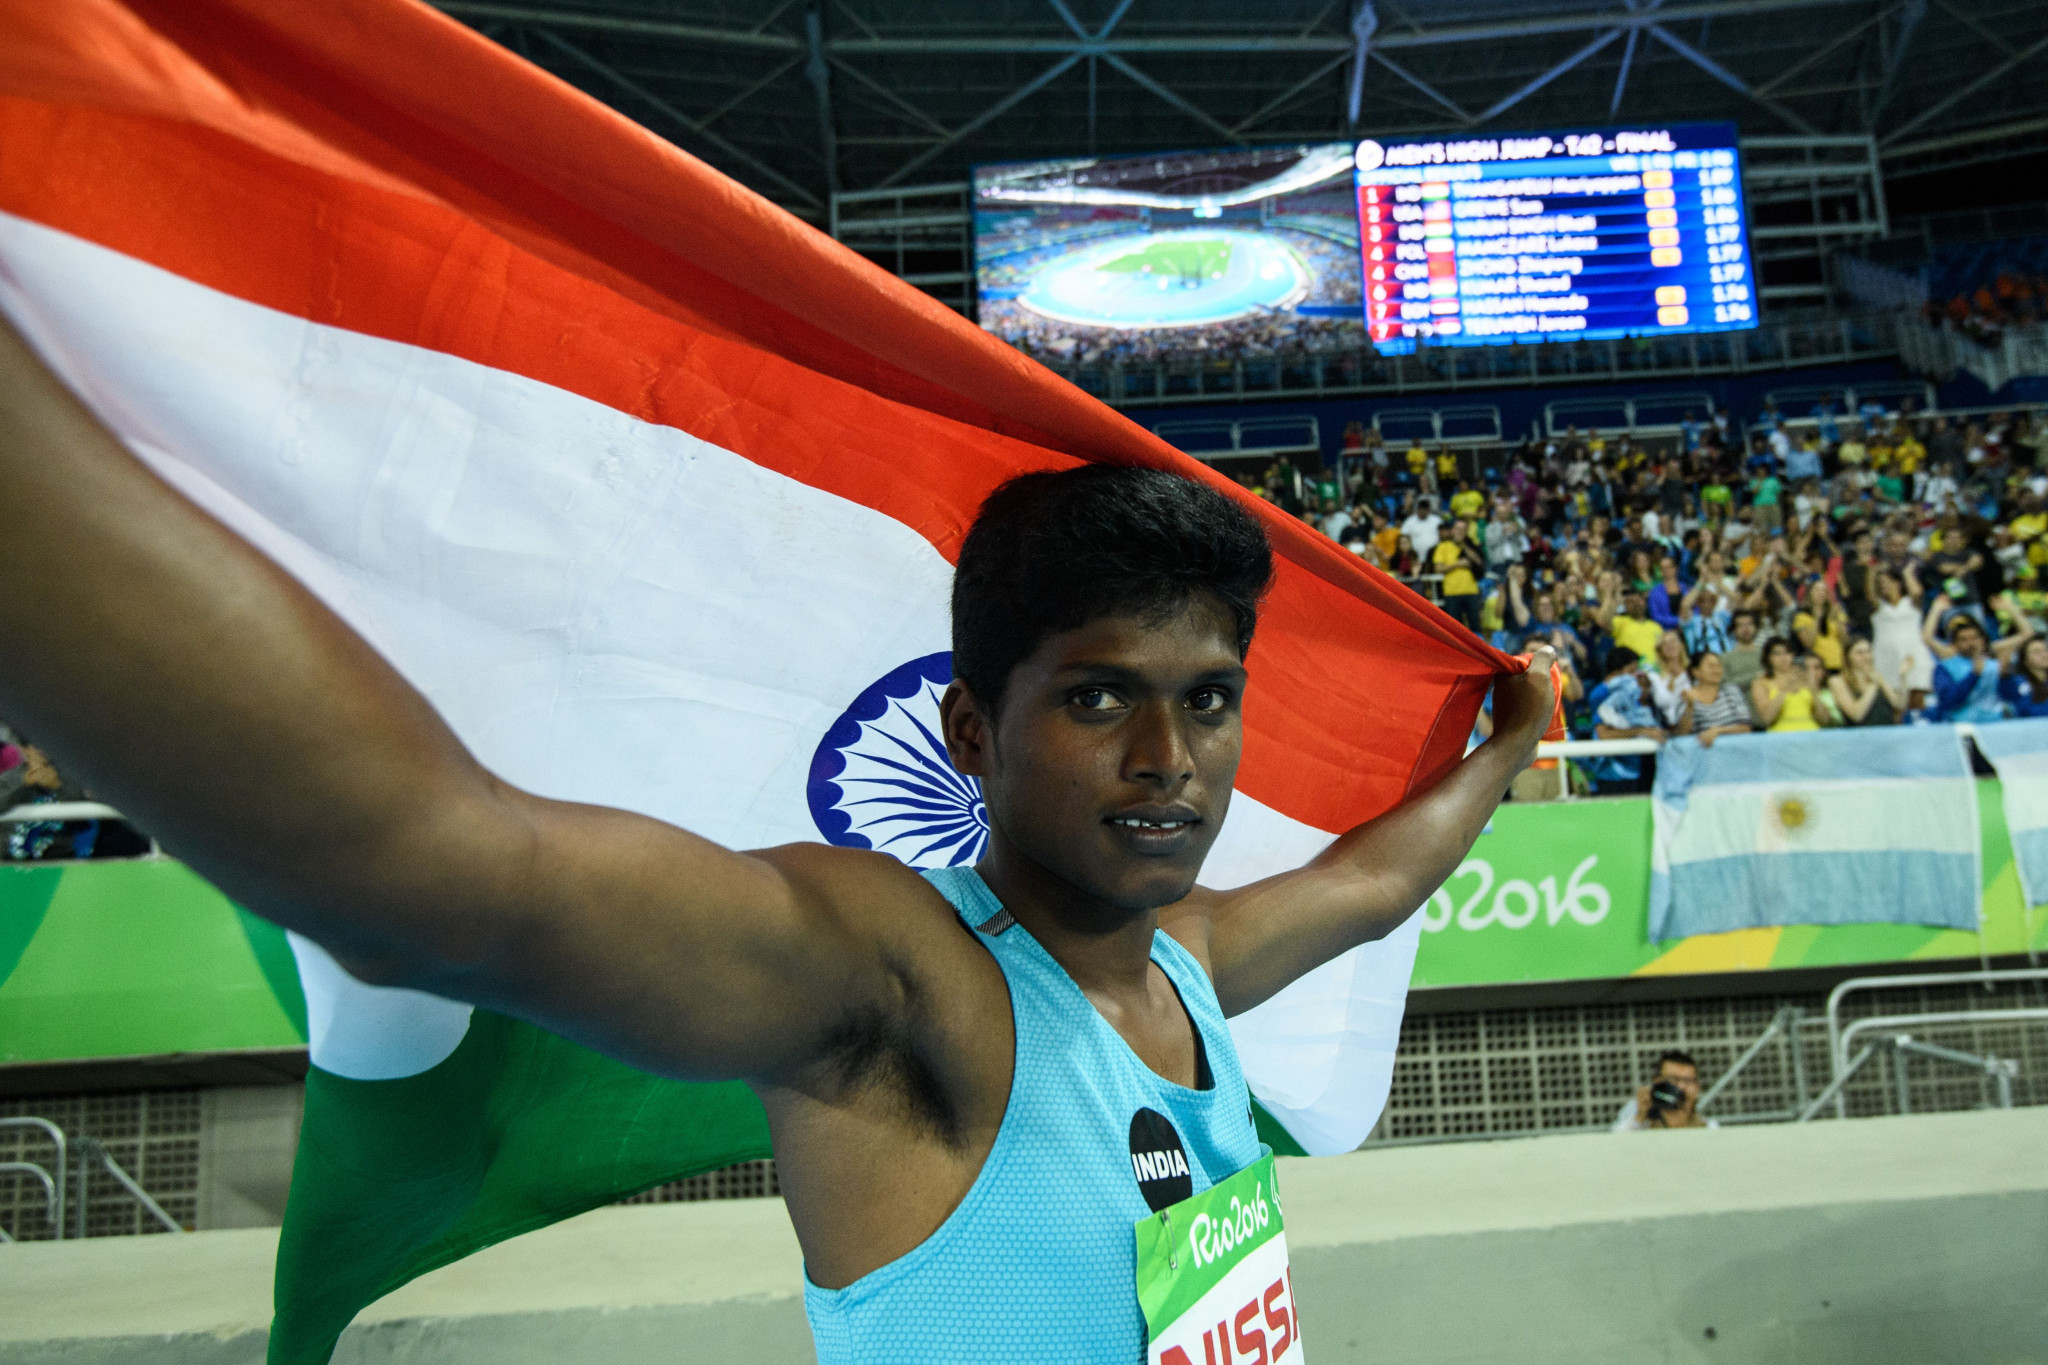 Trials to select India's Paralympic athletics team postponed due to COVID-19